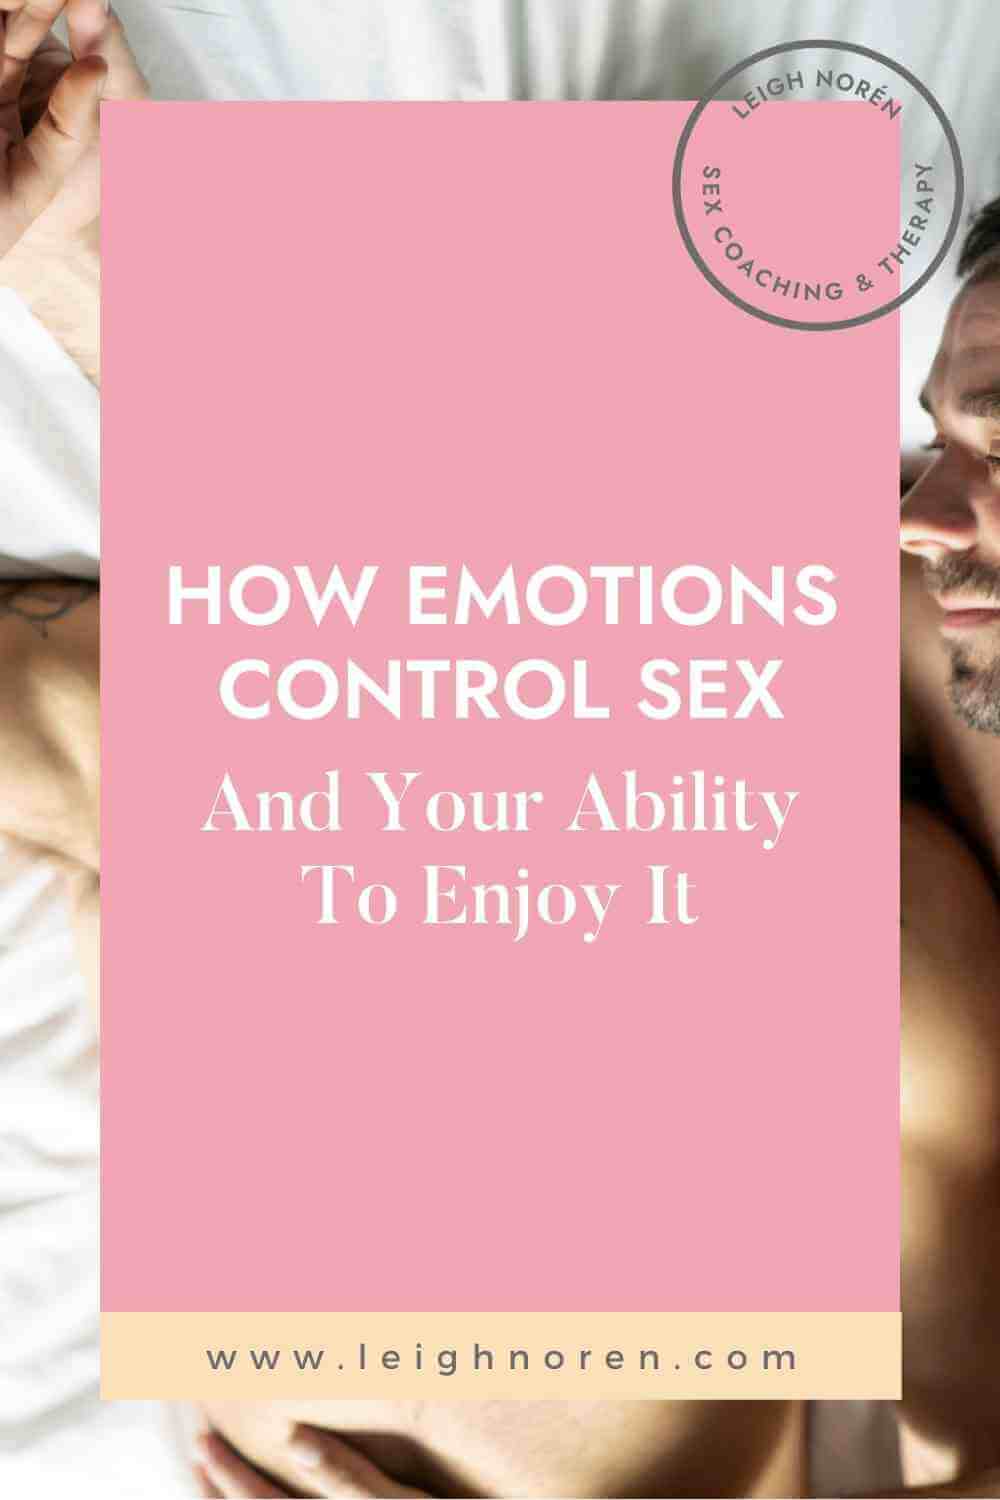 How Emotions Control Sex And Your Ability To Enjoy It